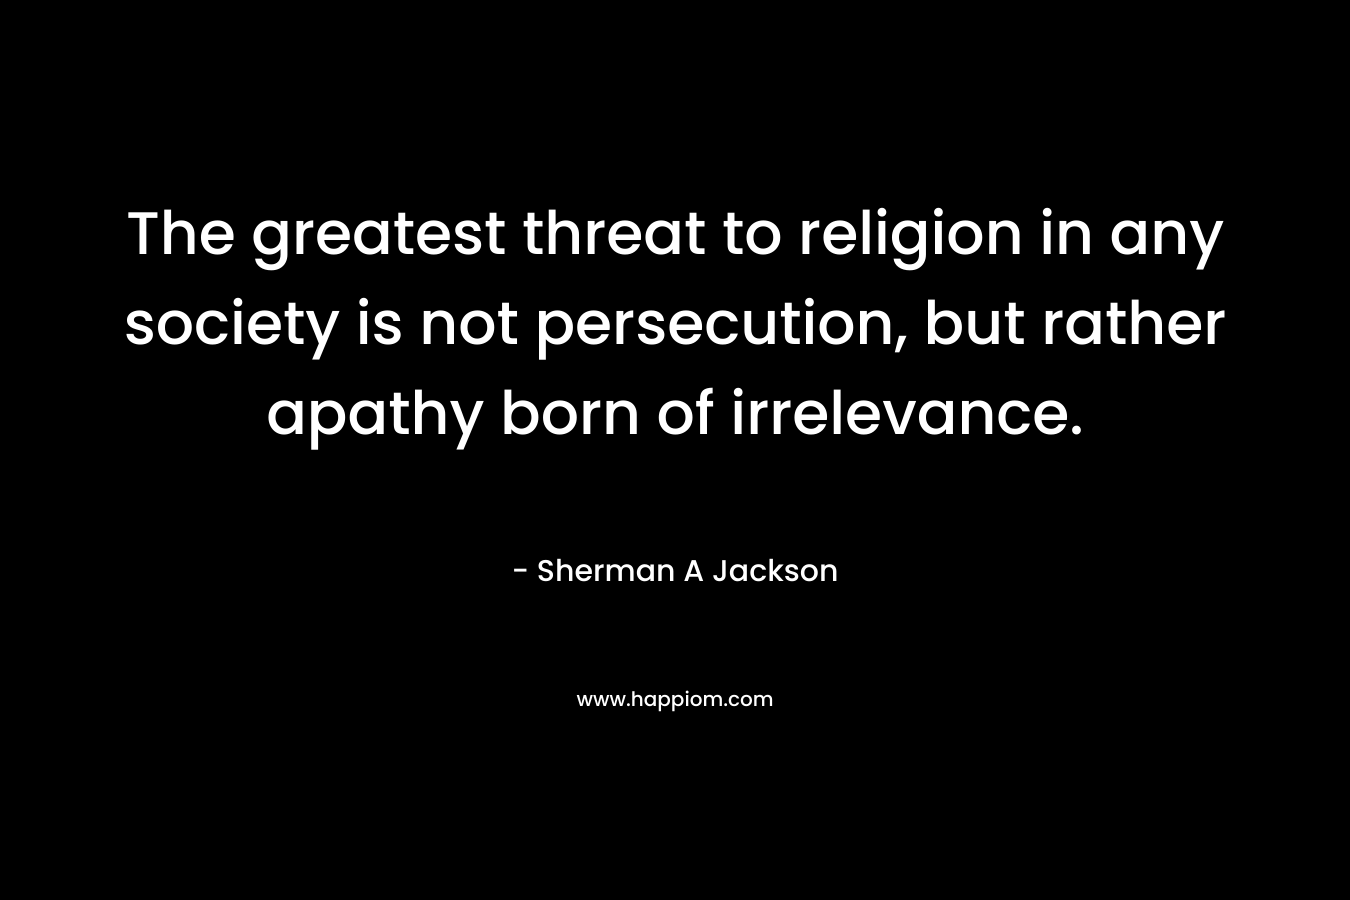 The greatest threat to religion in any society is not persecution, but rather apathy born of irrelevance. – Sherman A Jackson